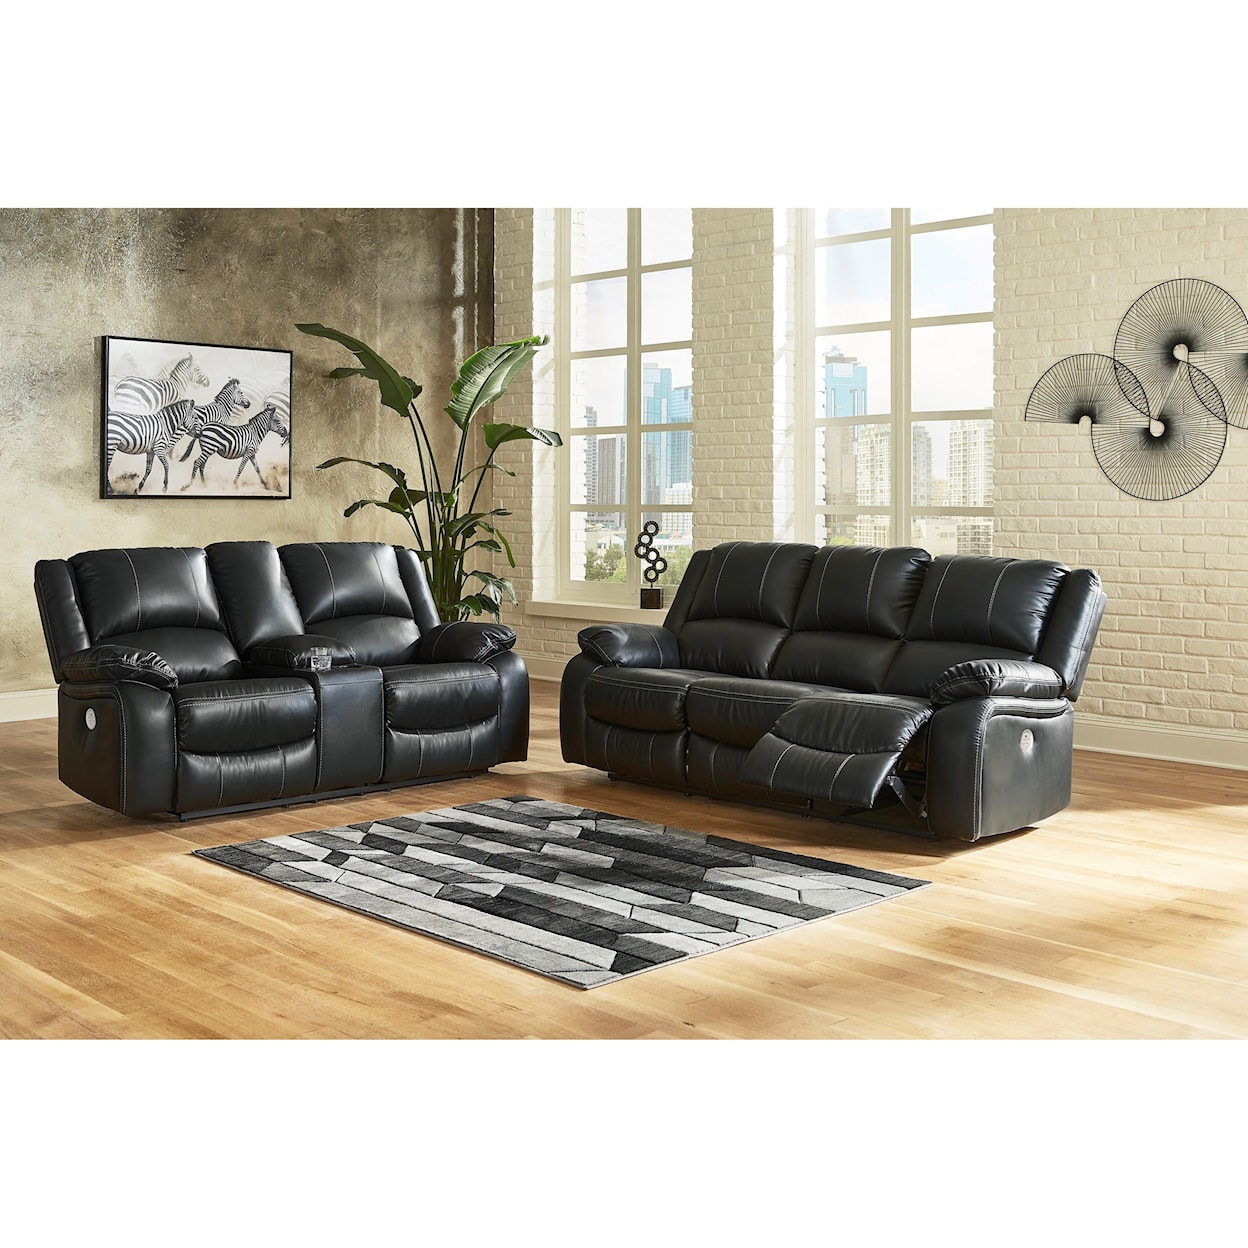 Signature Design by Ashley Furniture Calderwell Power Reclining Living Room Group